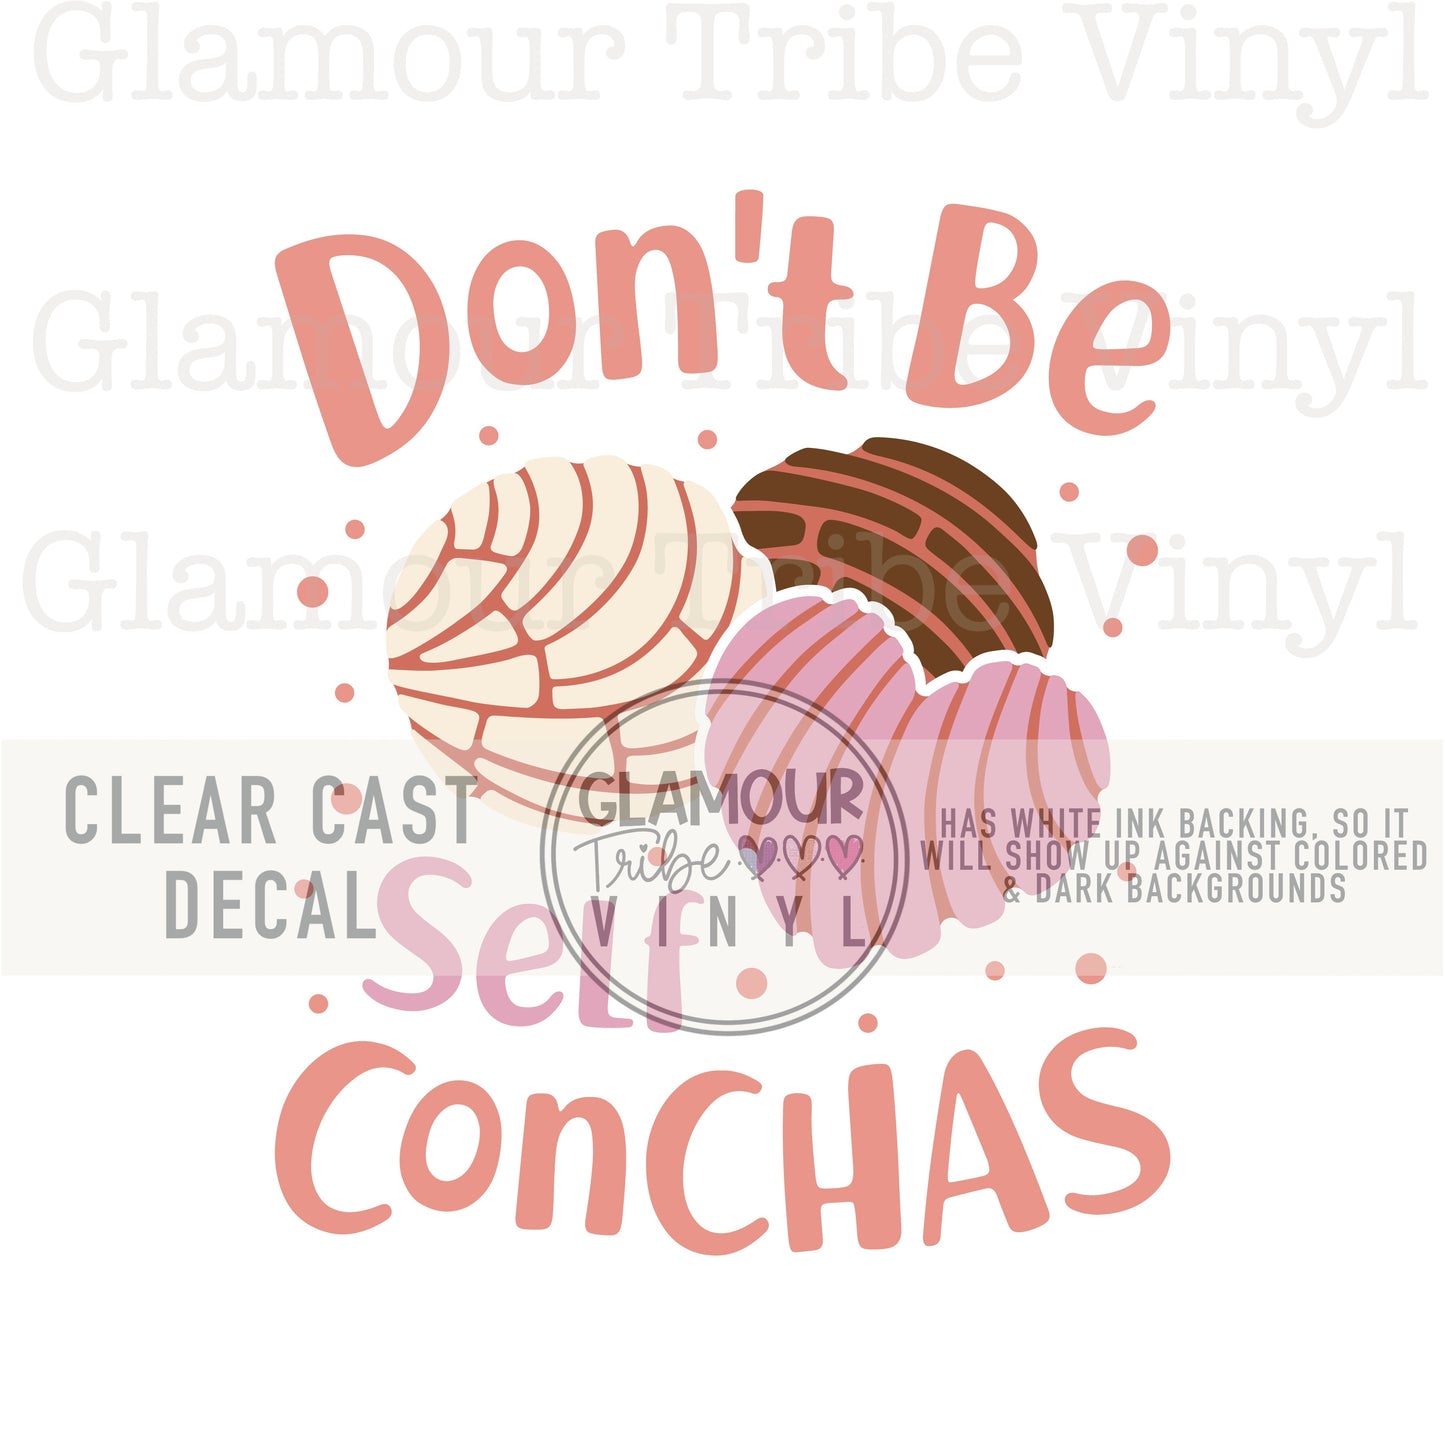 DON’T BE SELF CONCHAS